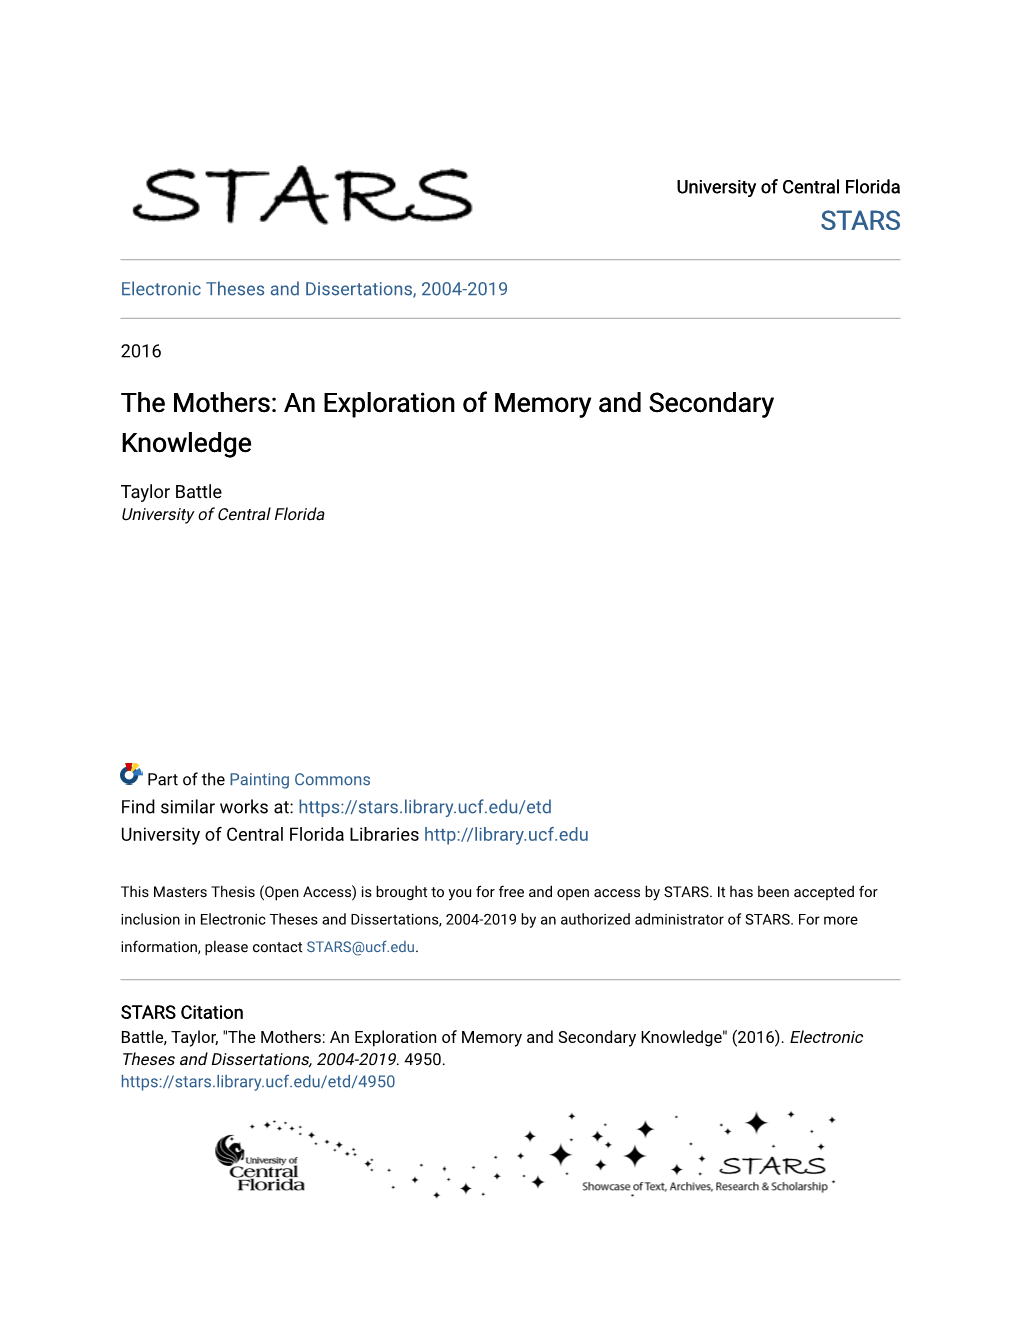 The Mothers: an Exploration of Memory and Secondary Knowledge